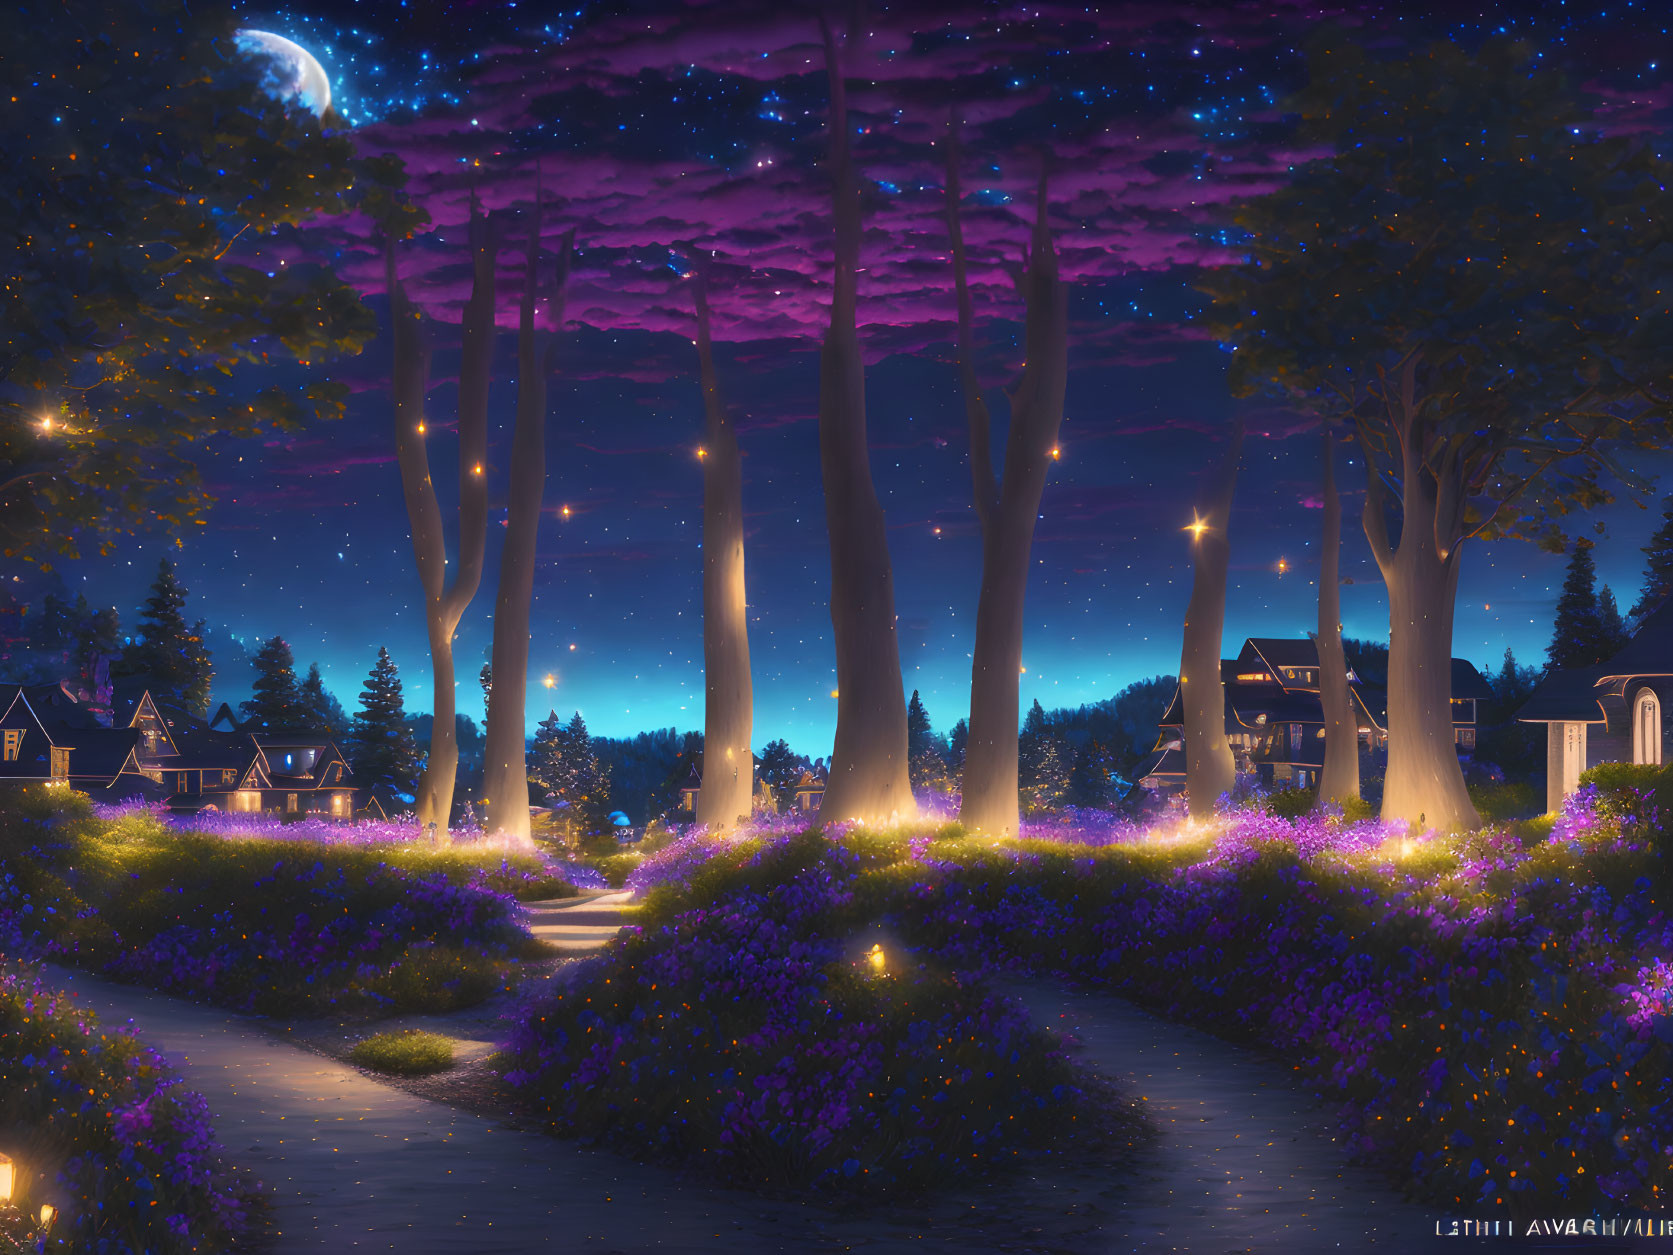 Starry night scene with glowing flowers, winding path, cozy houses under crescent moon